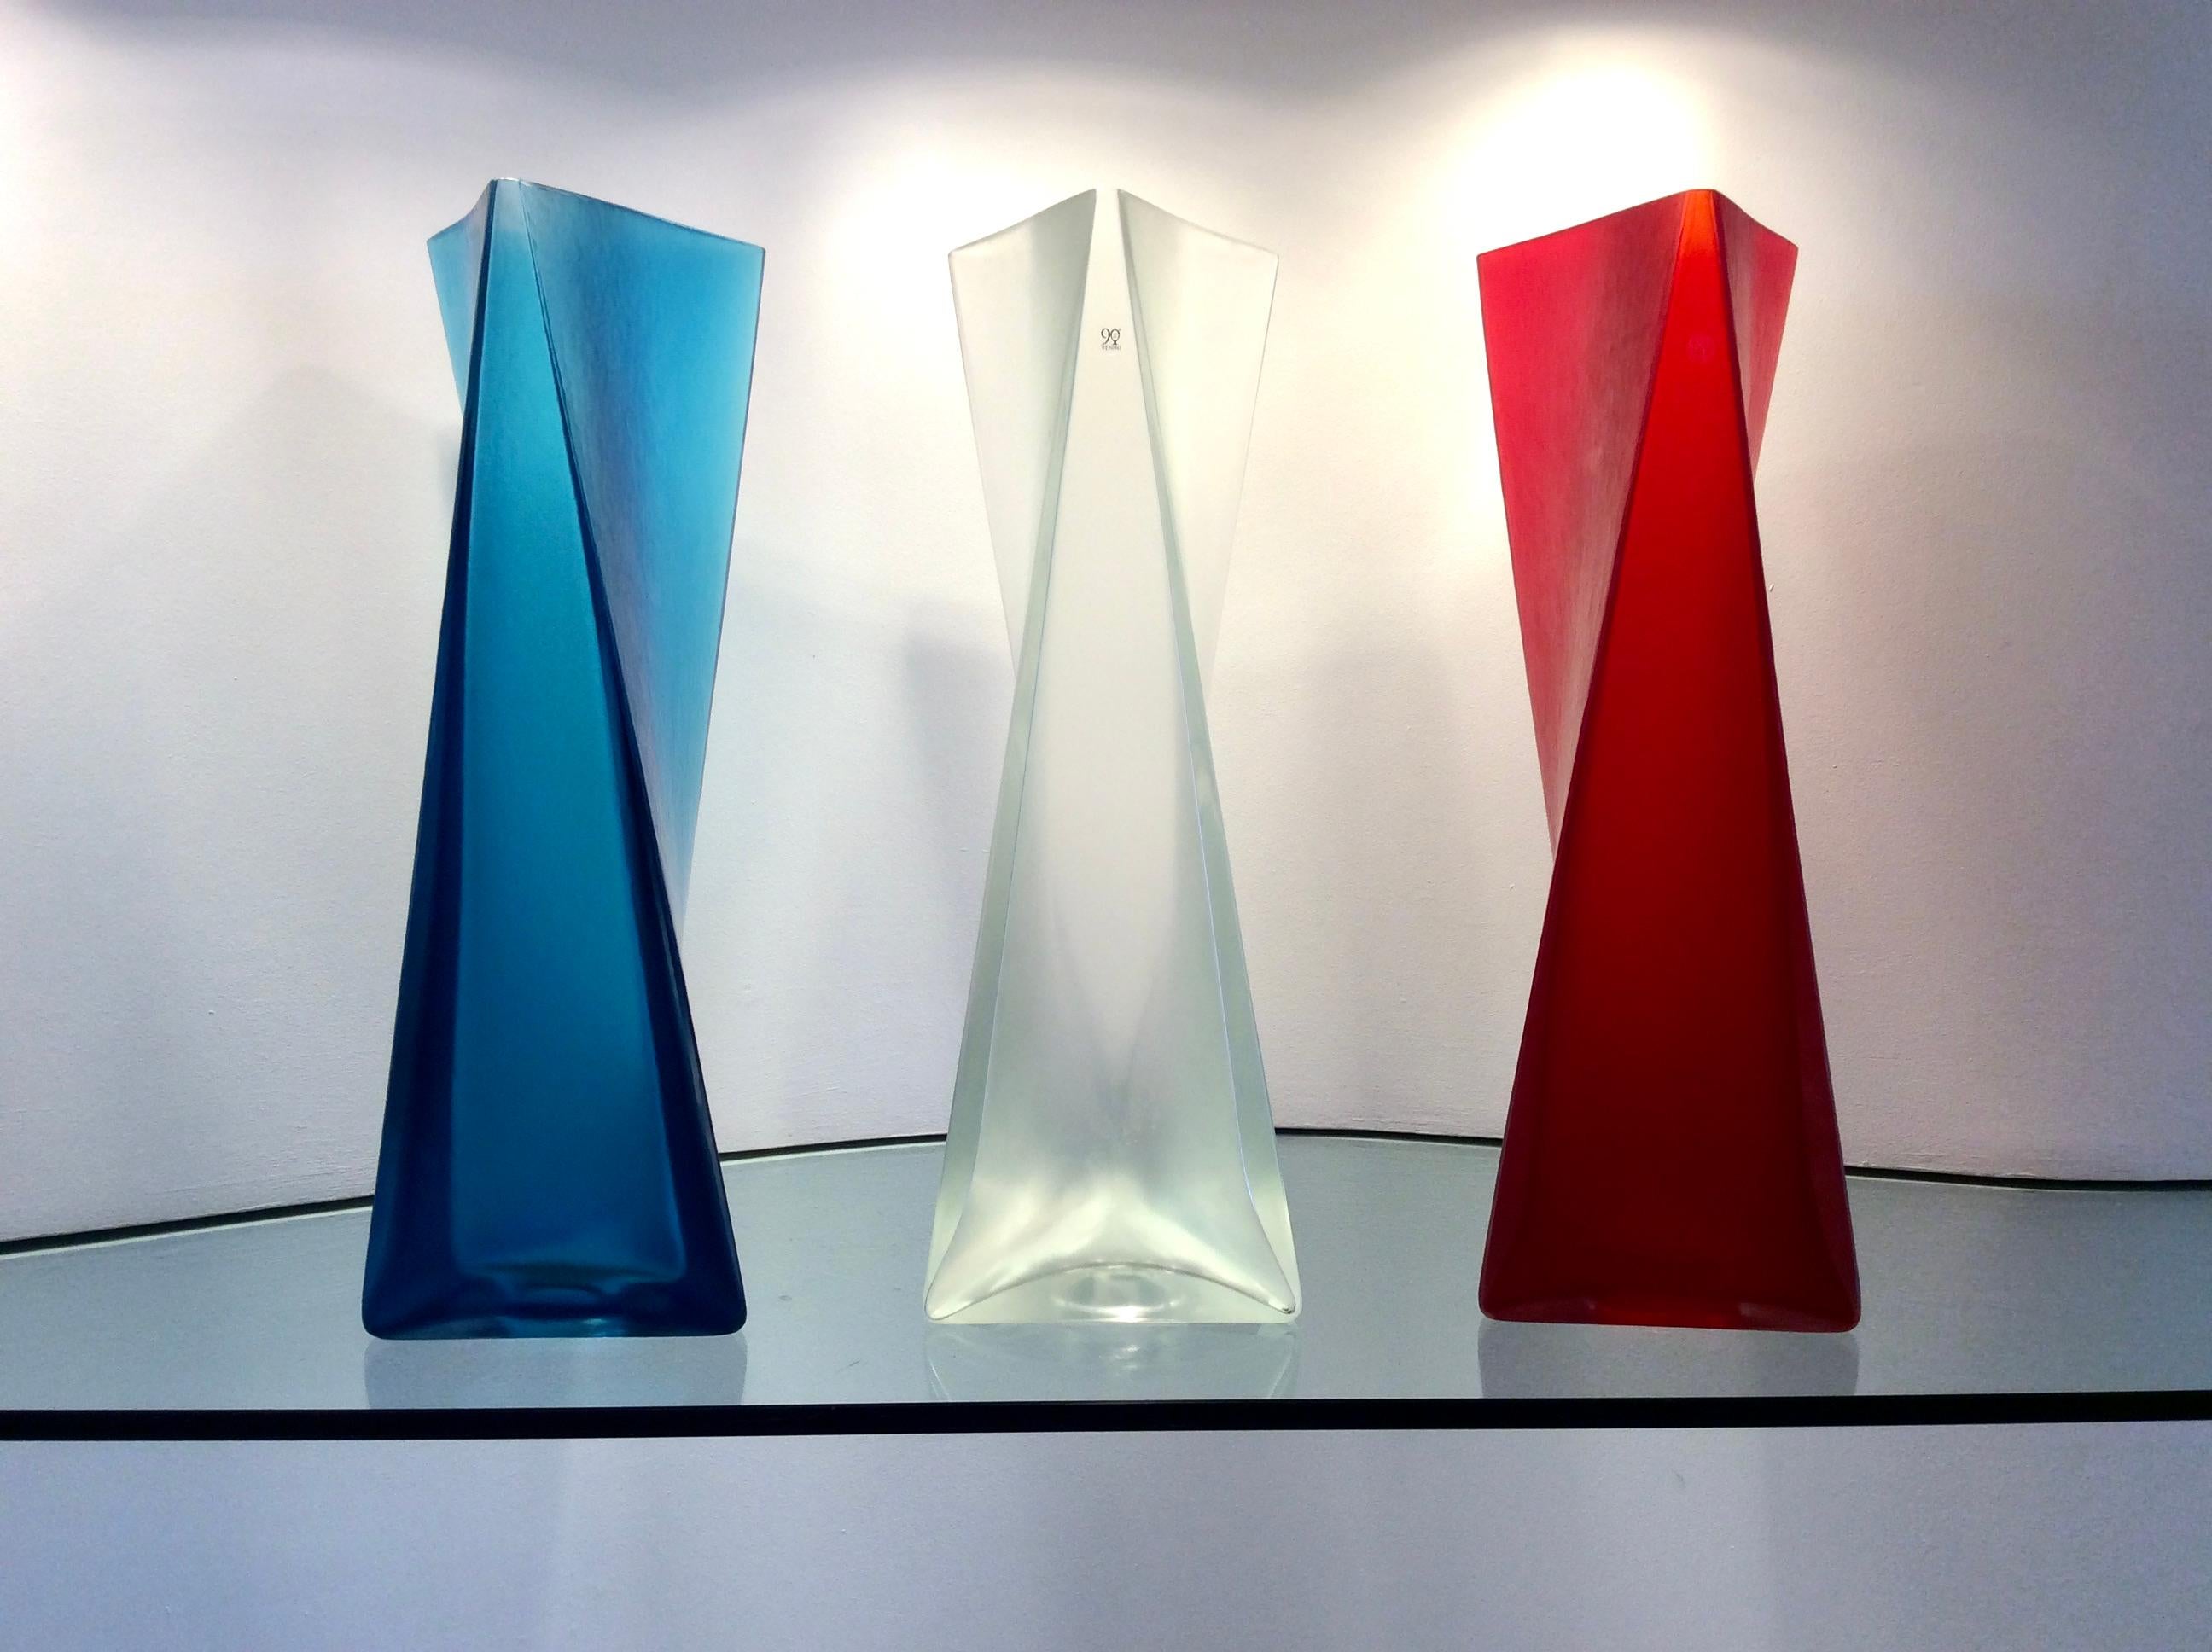 Blown Glass Limited Edition Set of 3 Monumental Murano Glass Vases by Tadao Ando For Sale